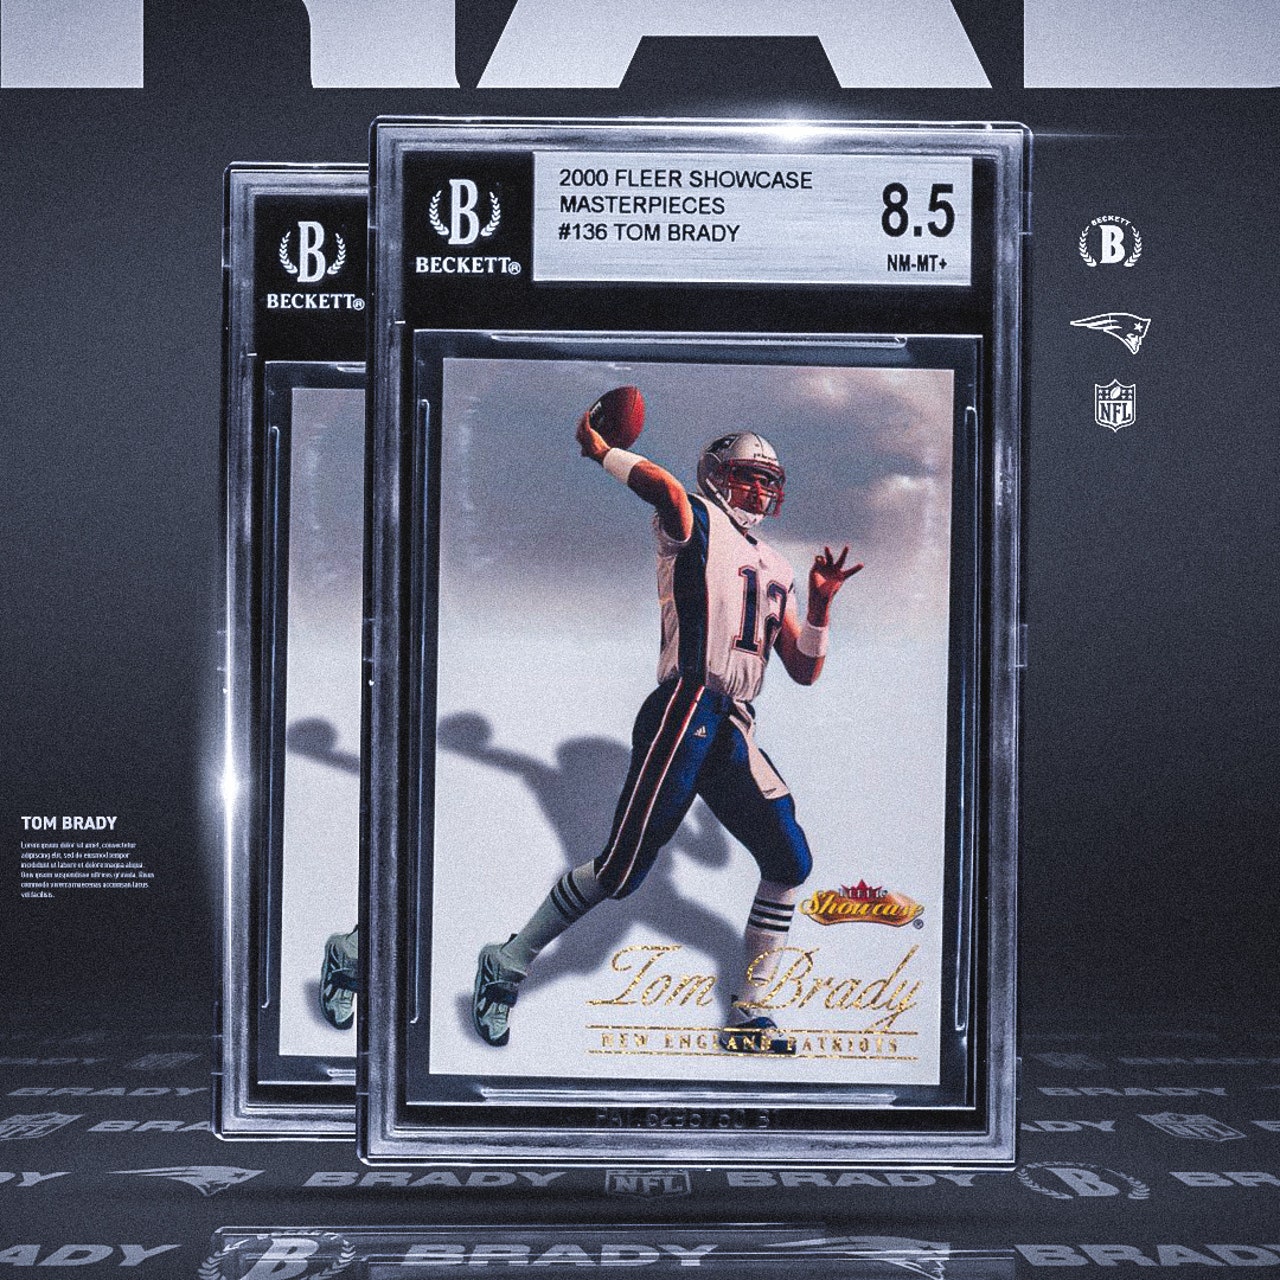 Tom Brady's second 1-of-1 rookie card sells for $396K at auction